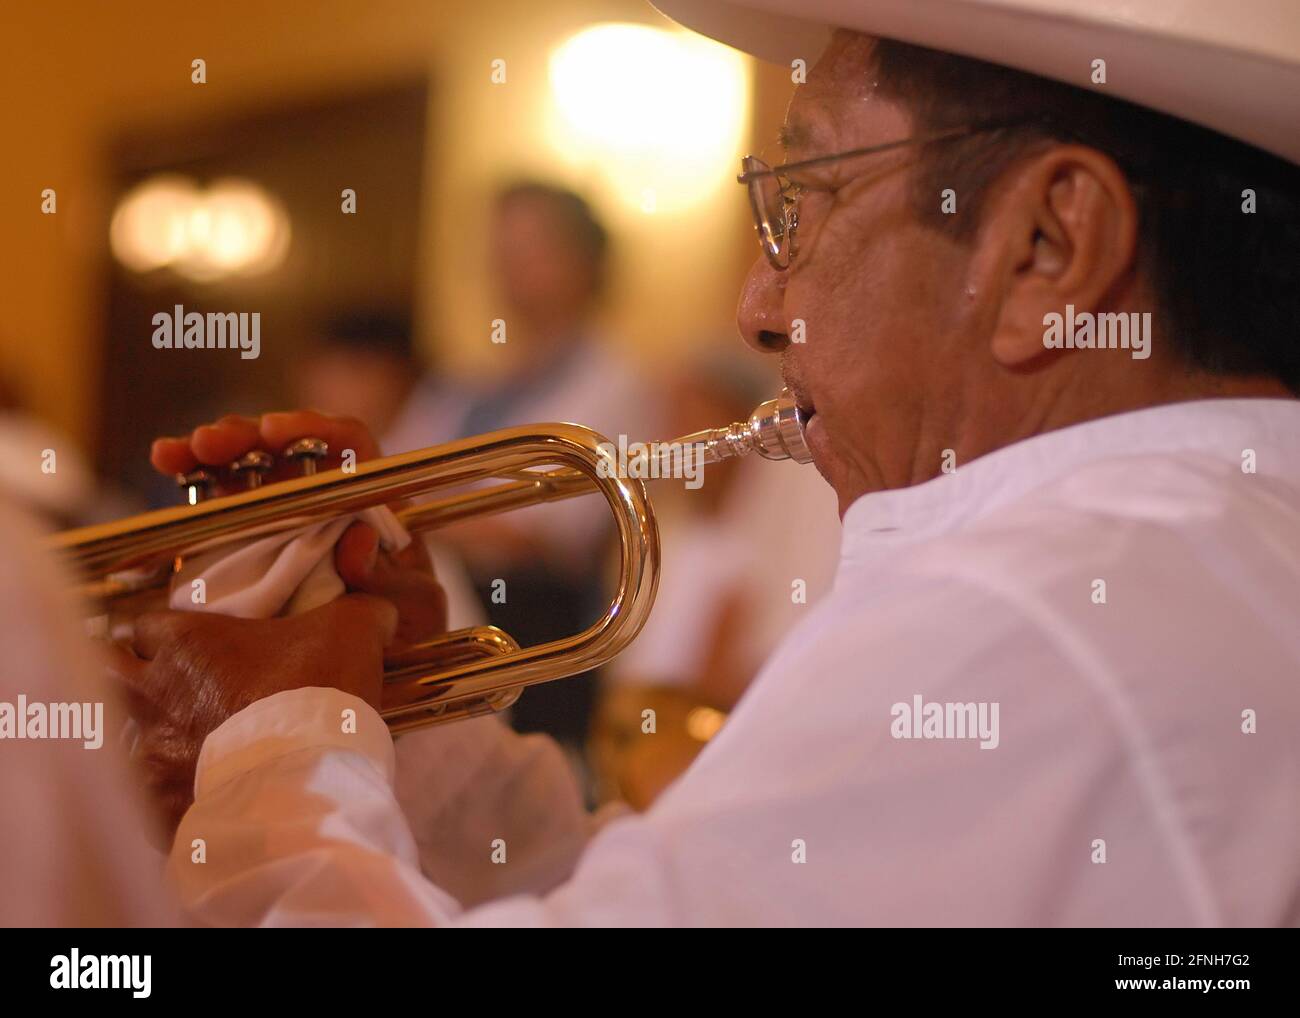 A musician playing a trumpet rear view. Shallow focus on the foreground hand and face with the rest of the section falling into the blur of the backgr Stock Photo